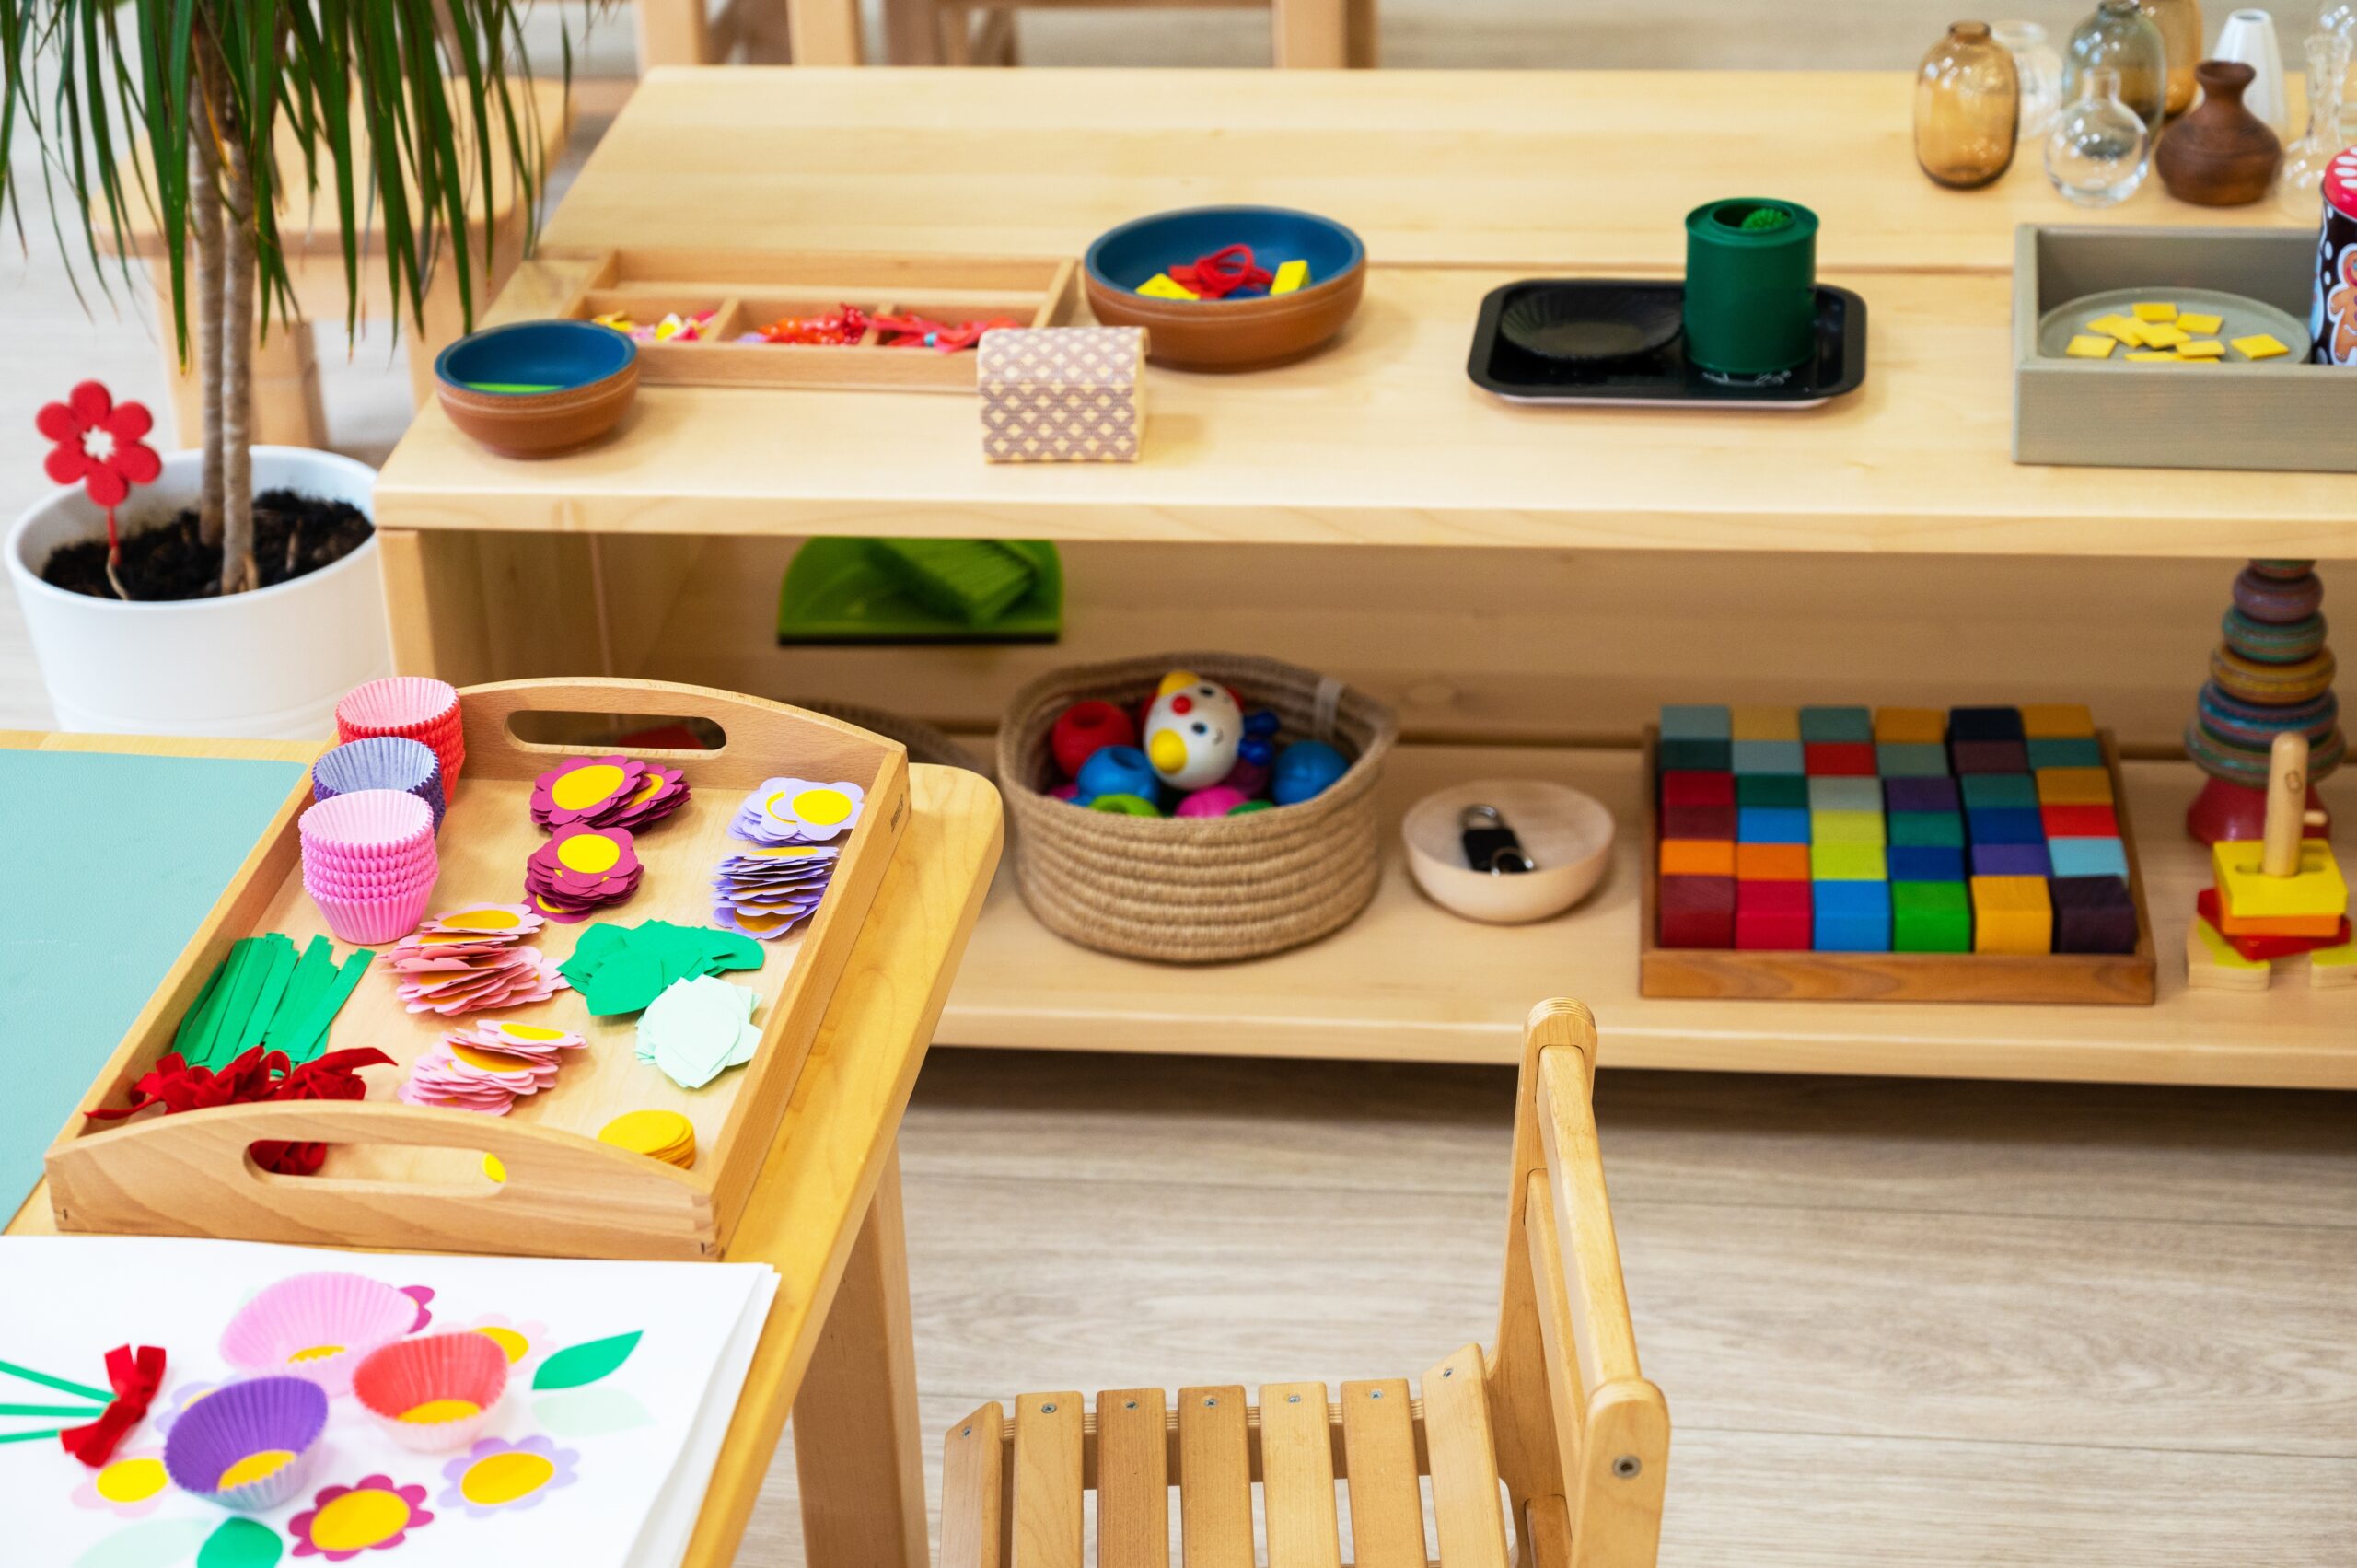 Preschool classroom with learning materials on a table and shelves.